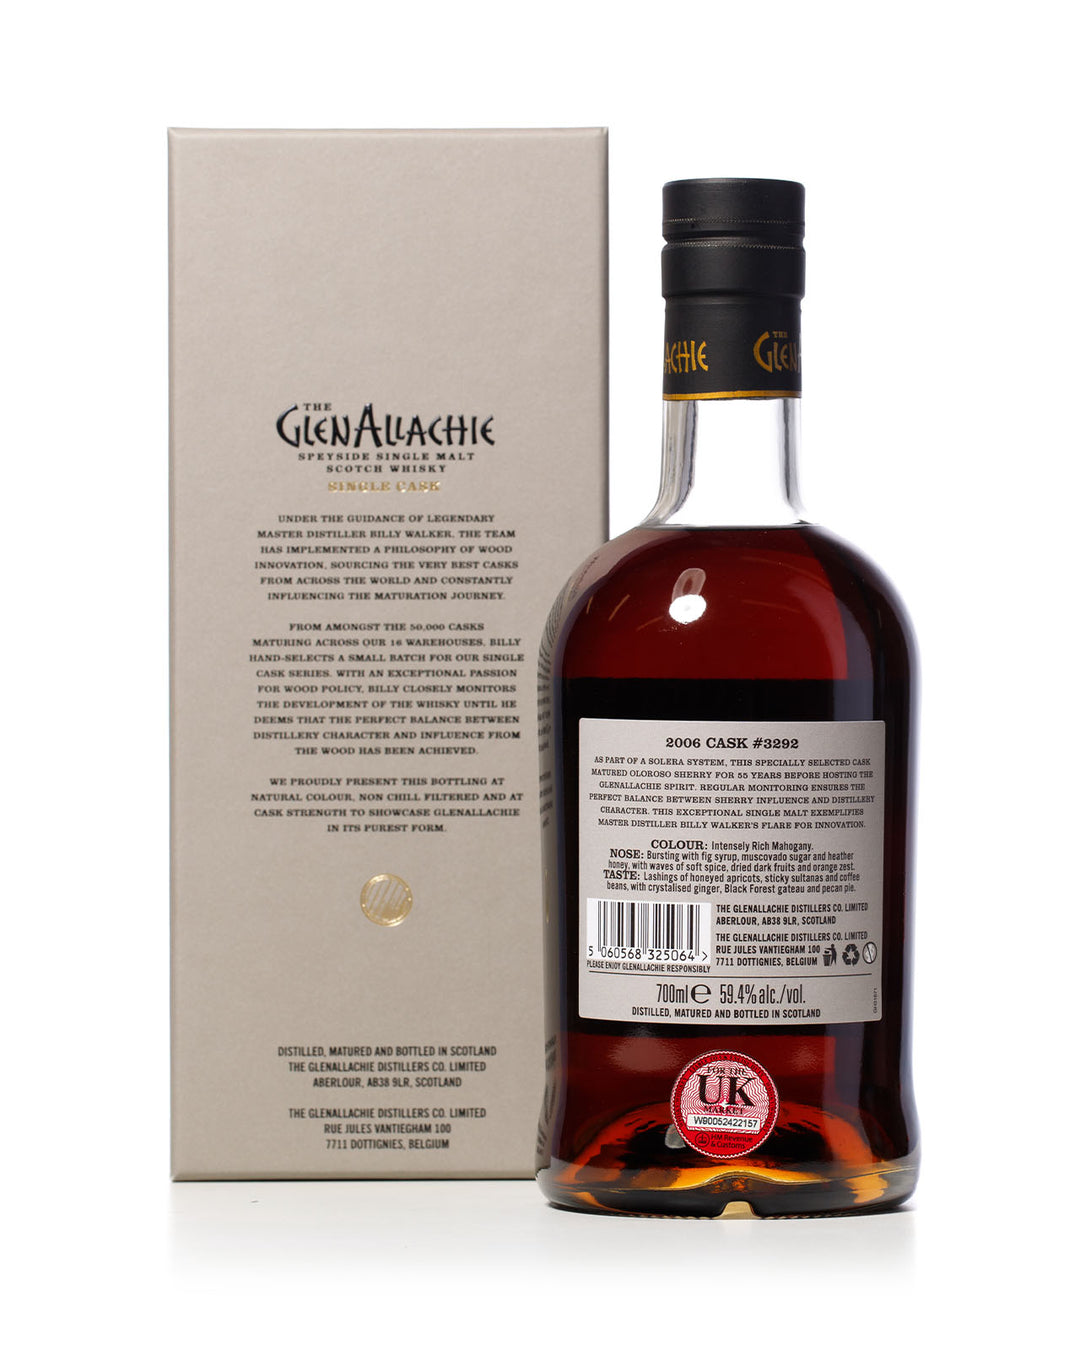 Glenallachie 2006 15 Year Old Single Cask Bottled 2022 With Original Box